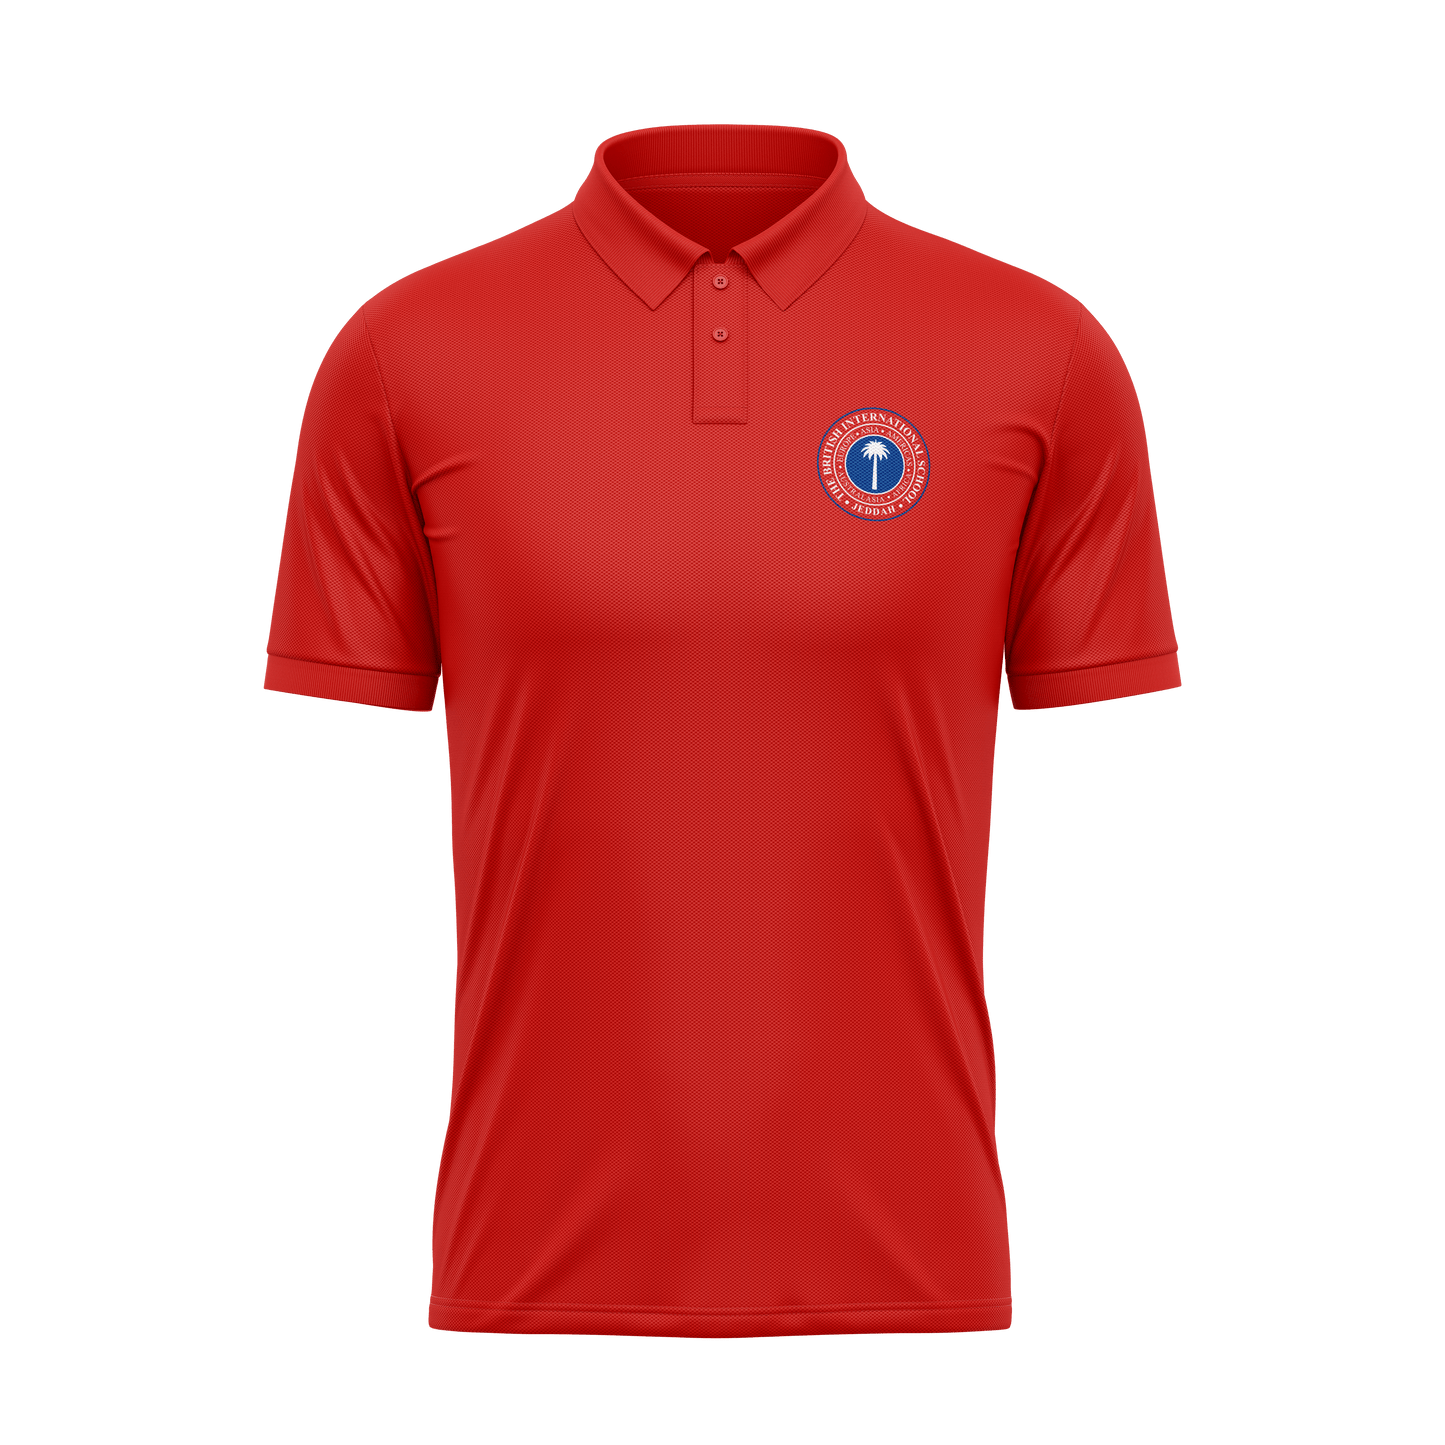 Unisex Red Polo (Early Years)